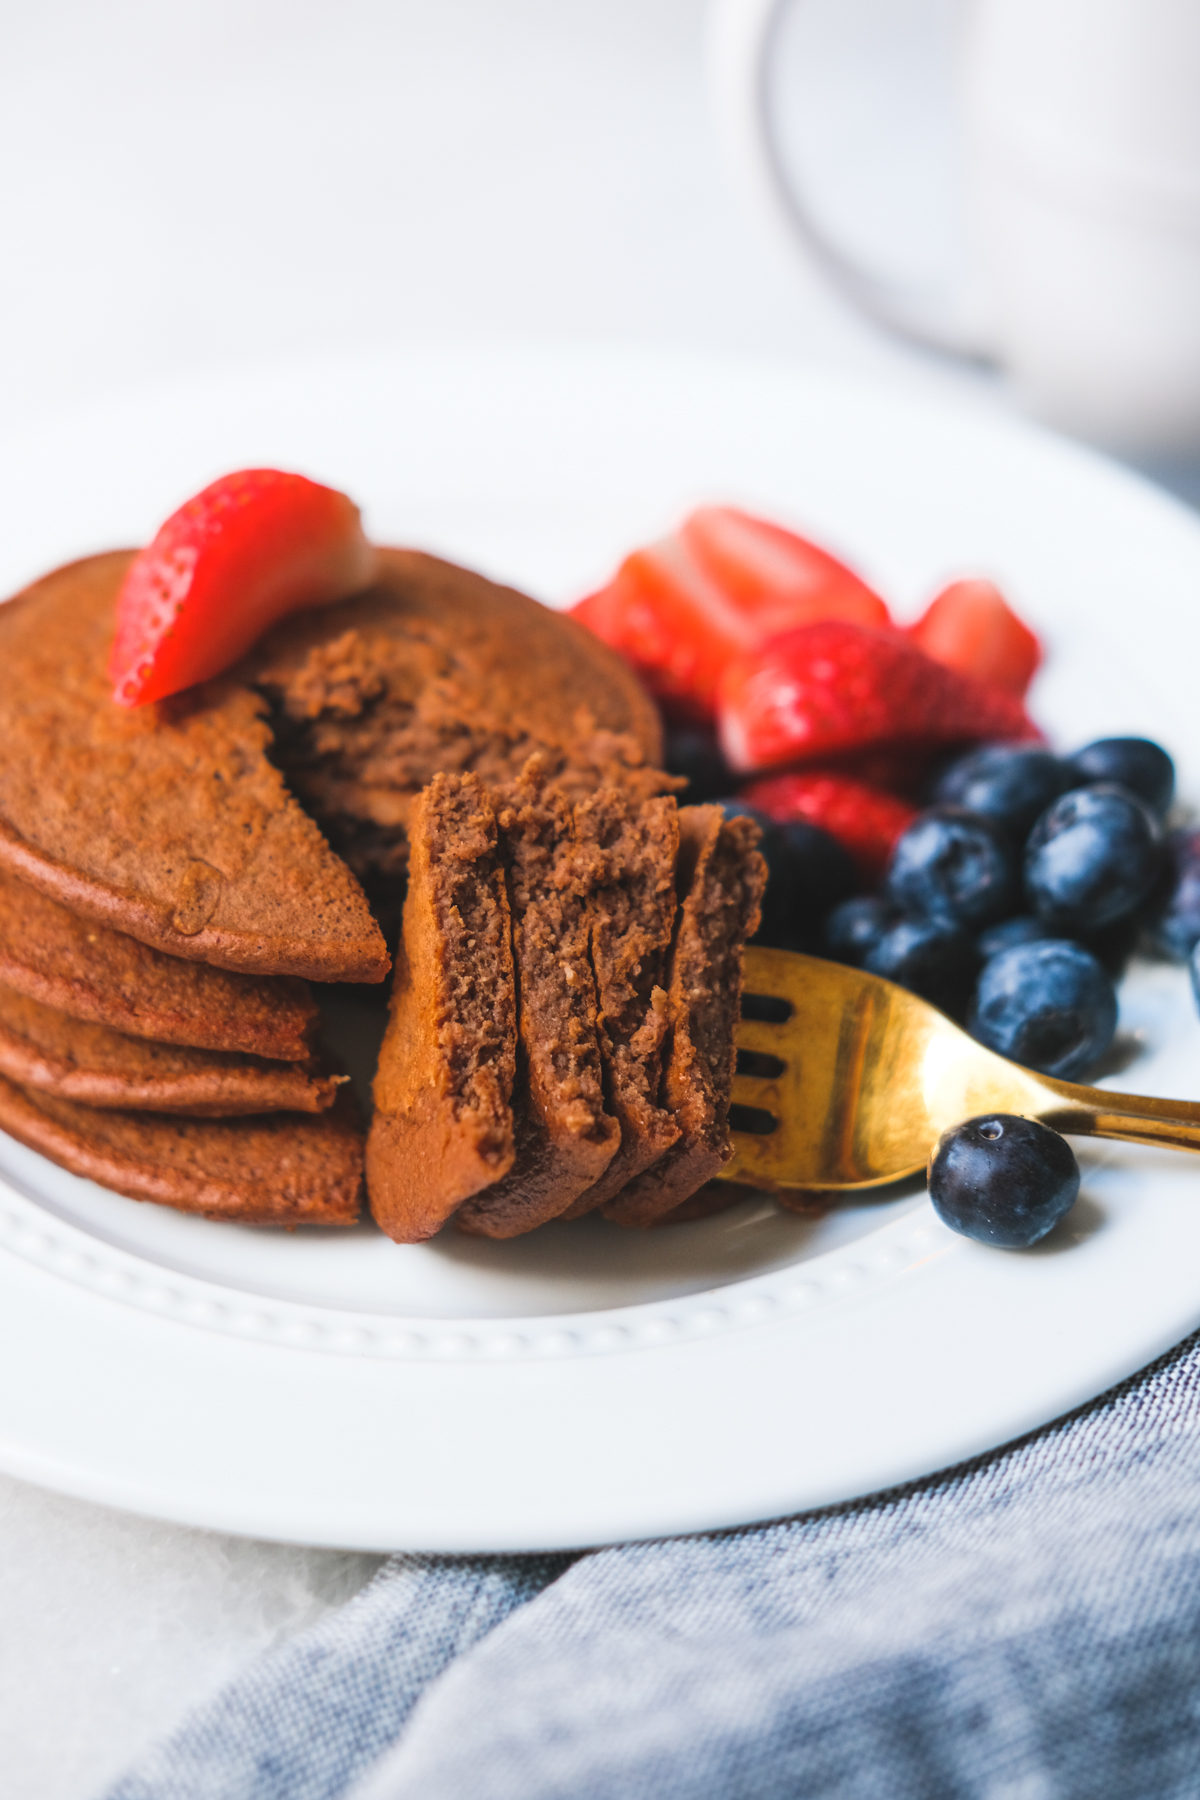 forkful of chocolate protein pancakes with berries on a plate